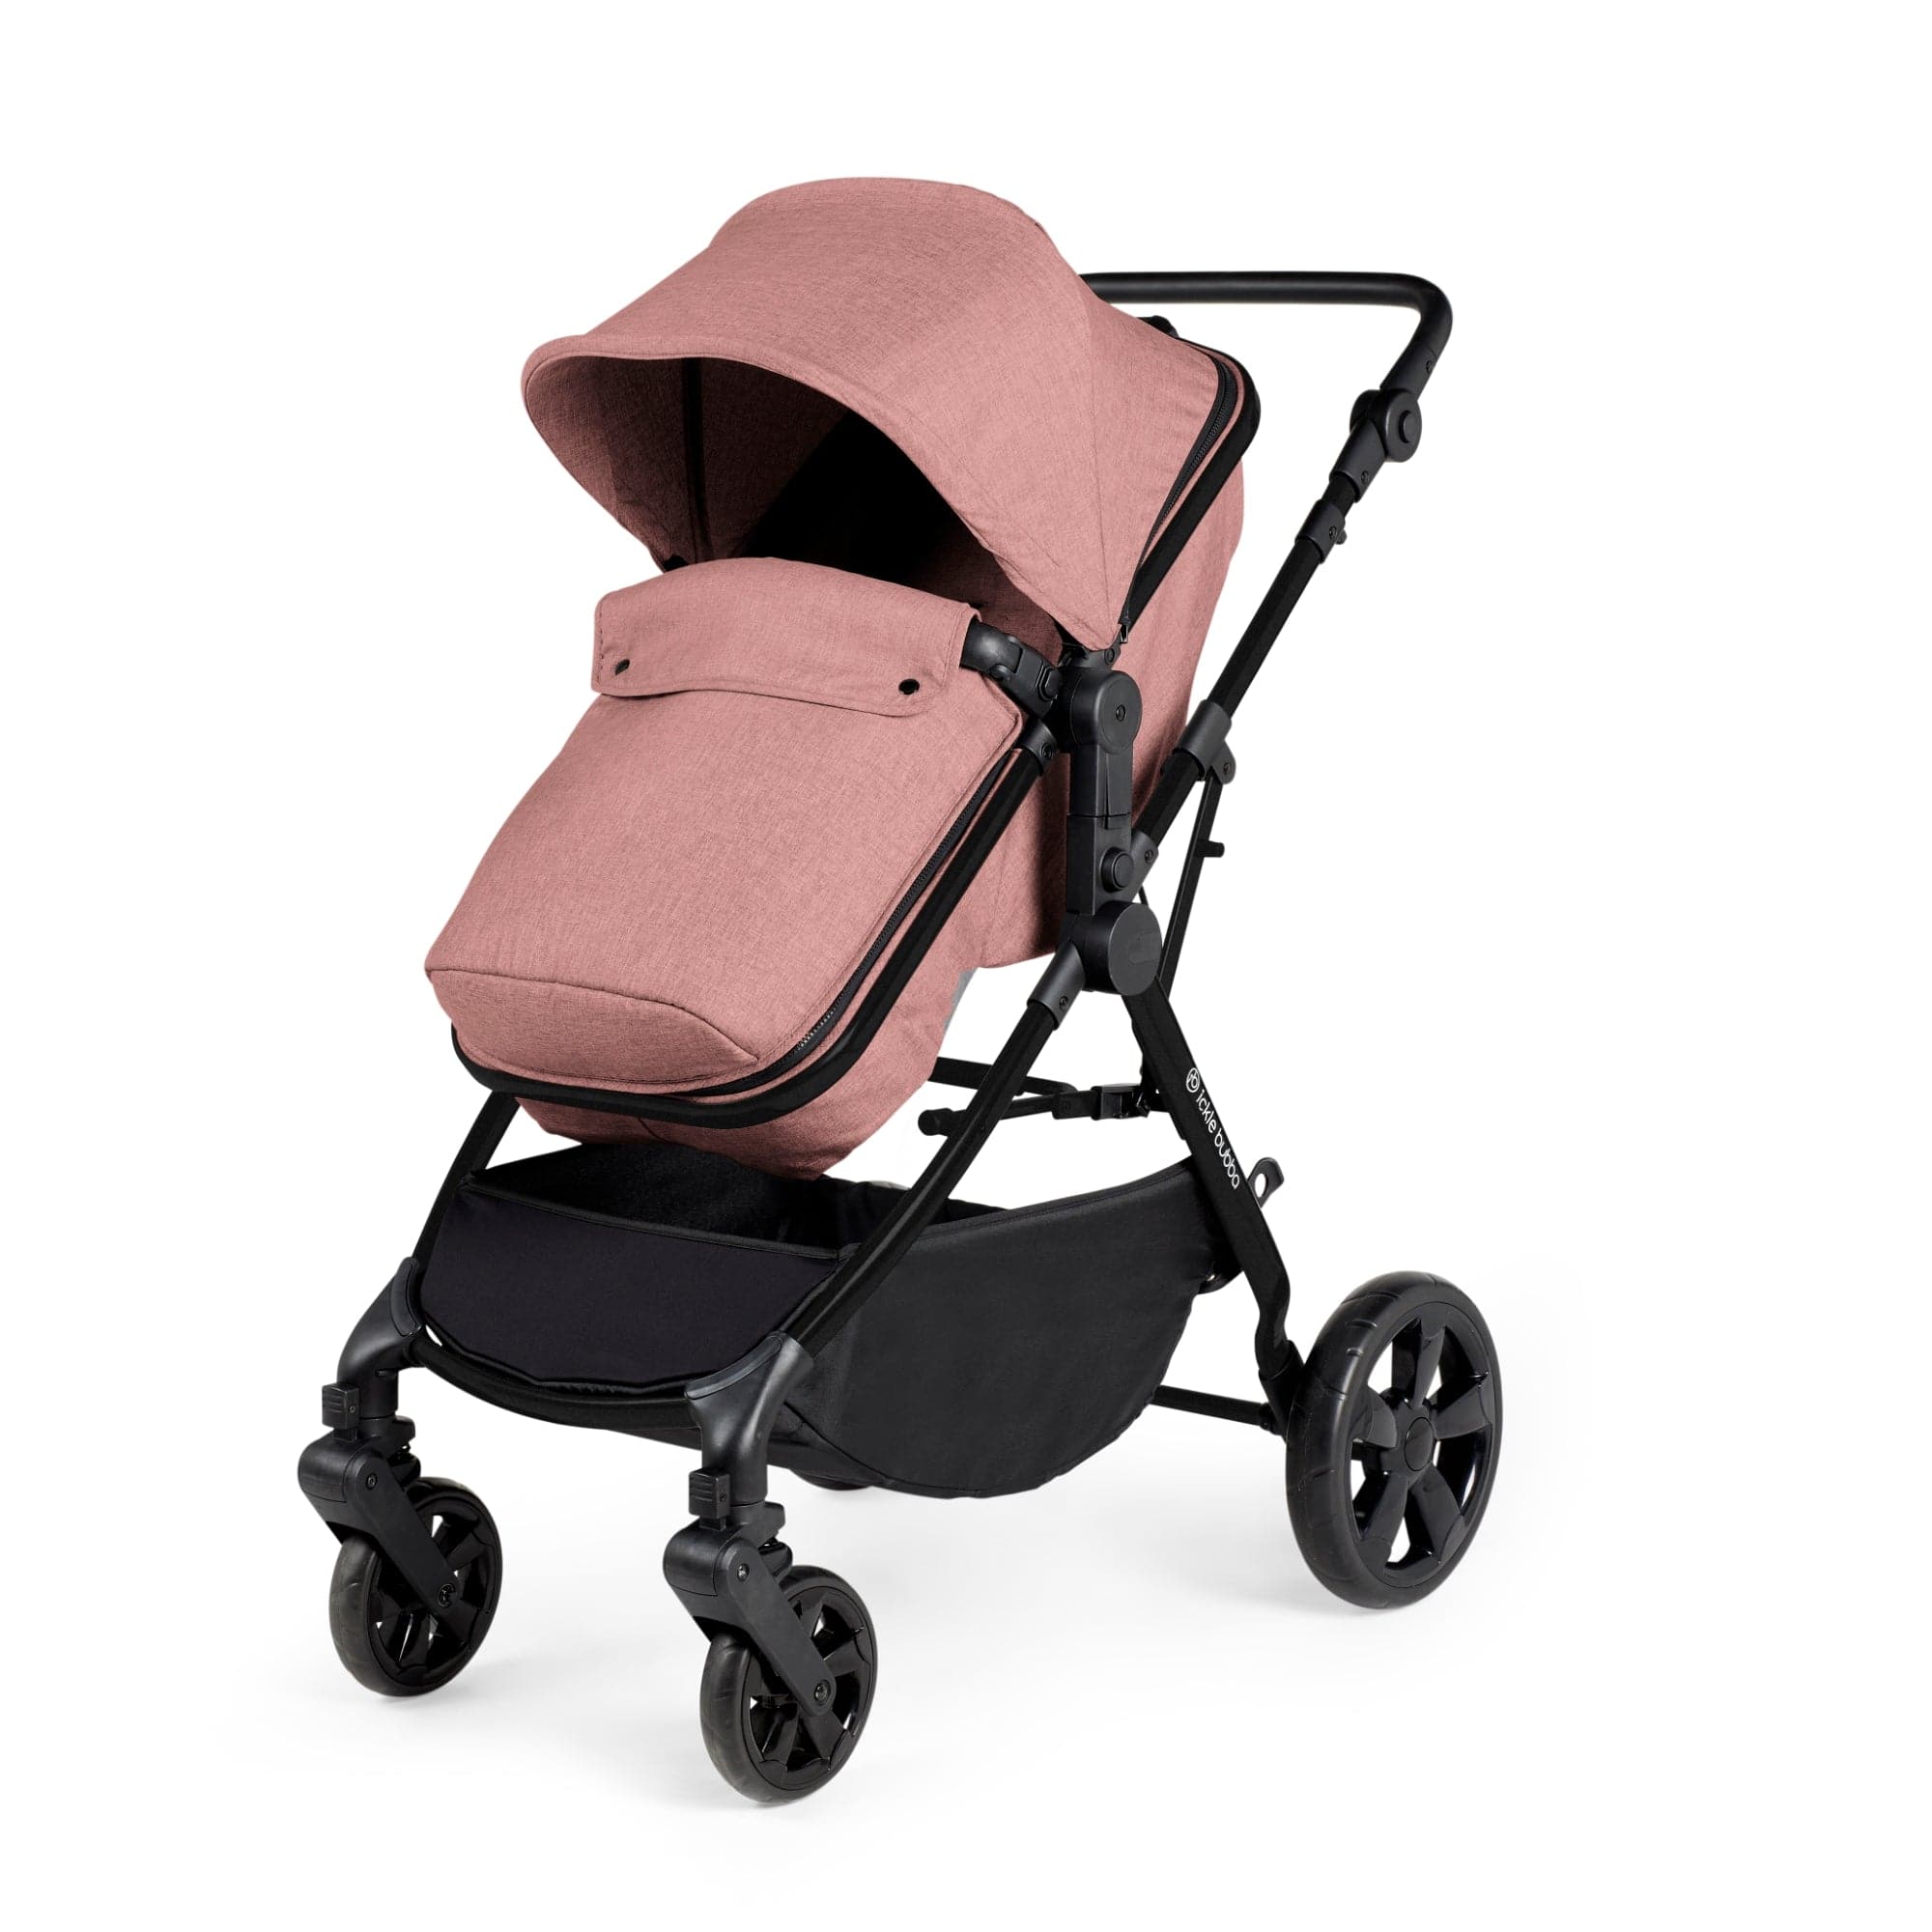 Ickle Bubba Comet 2-in-1 Plus Pushchair - Dusky Pink - For Your Little One